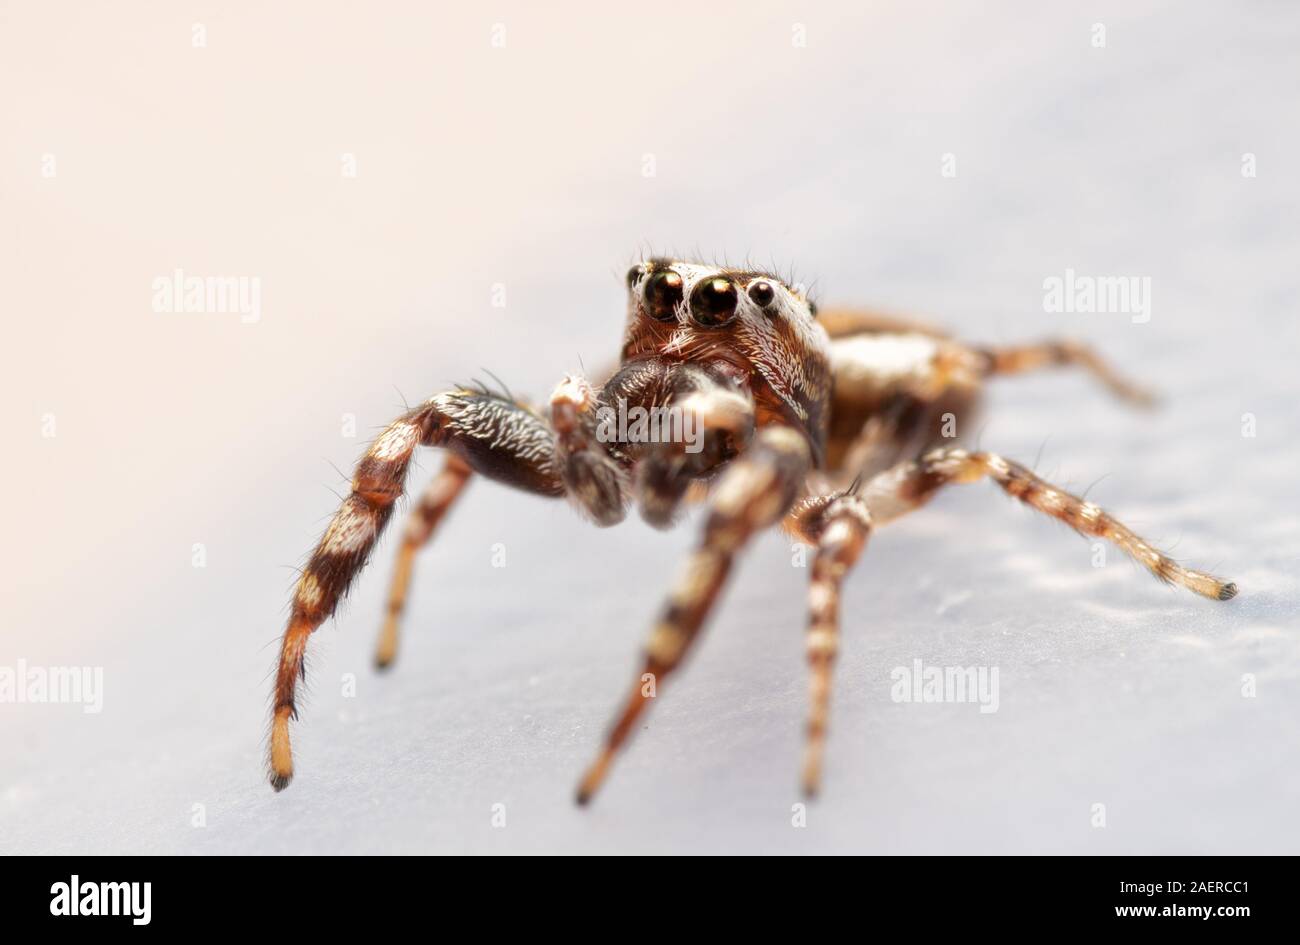 Three-quarter frontal view of a male Pelegrina proterva, Common White-Cheeked jumping spider looking up Stock Photo